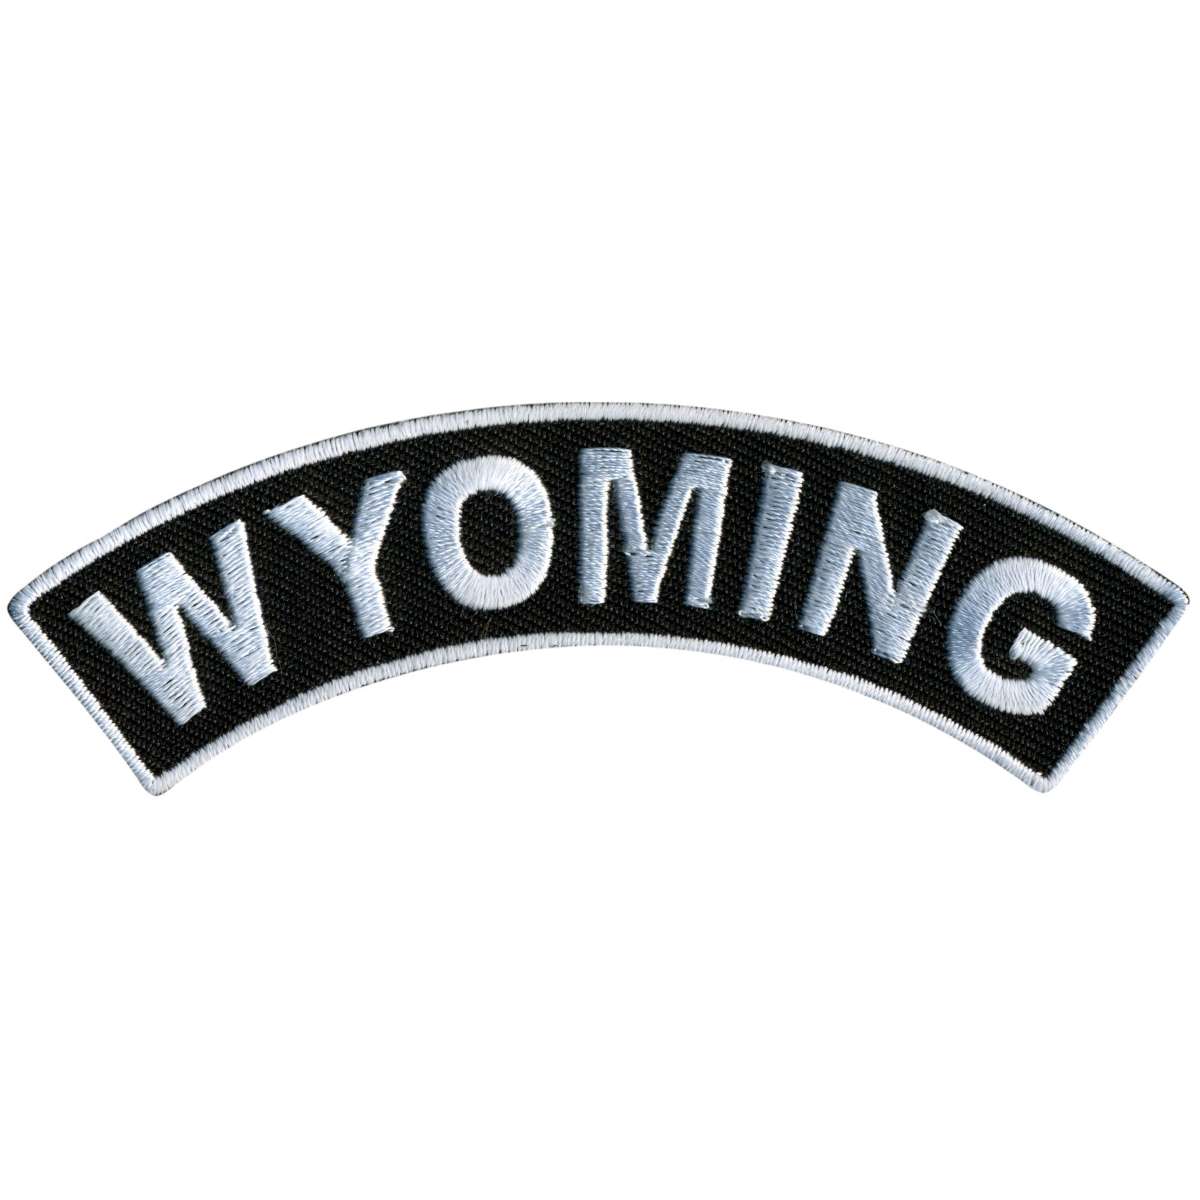 Hot Leathers Wyoming 4” X 1” Top Rocker Patch PPM4100